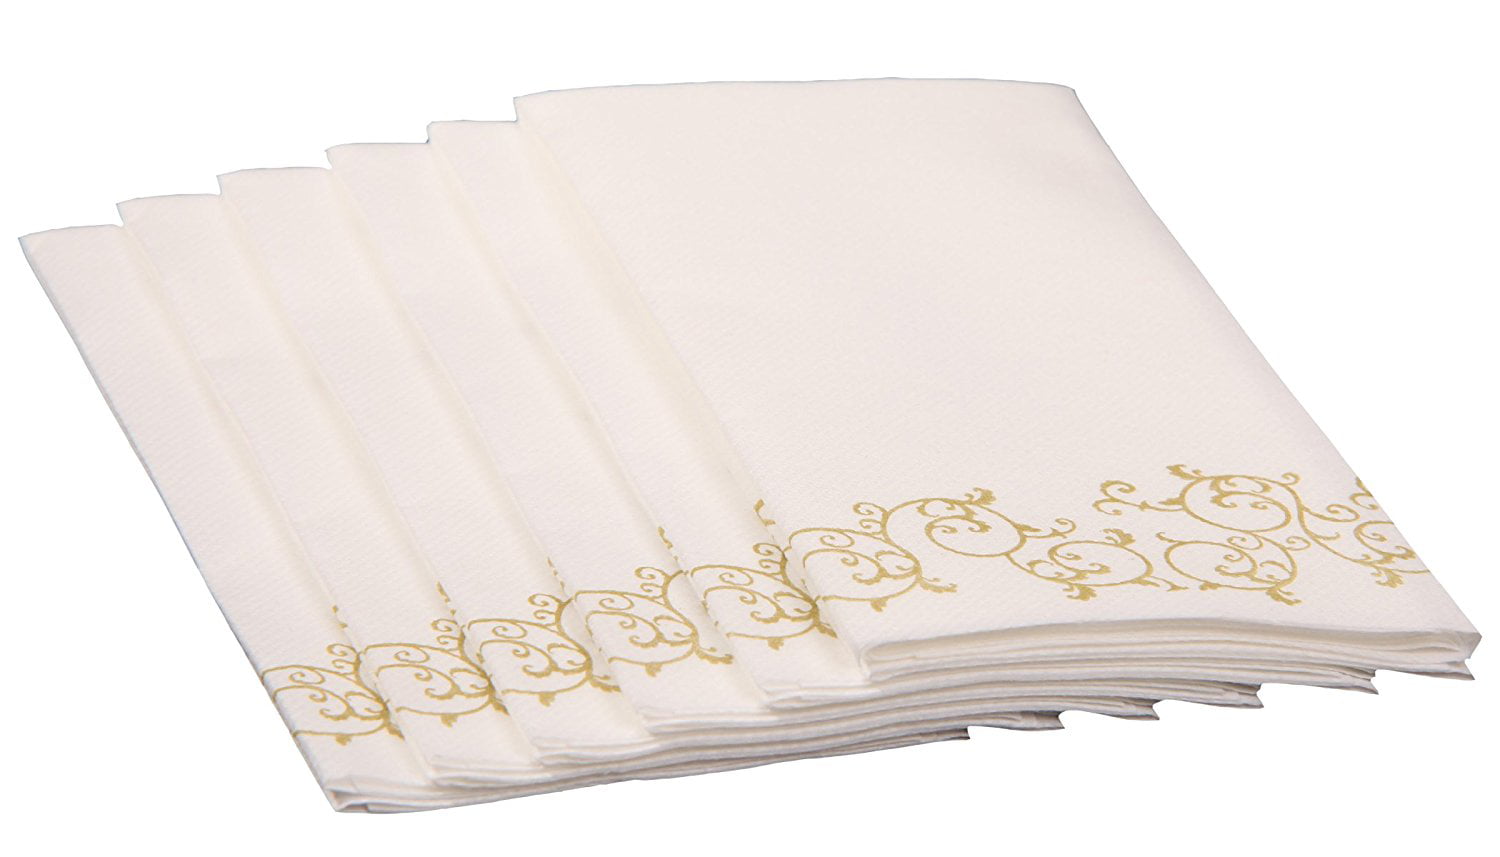 SimuLinen Hand Towels – Decorative GOLD Floral – Durable, Cloth Like ...